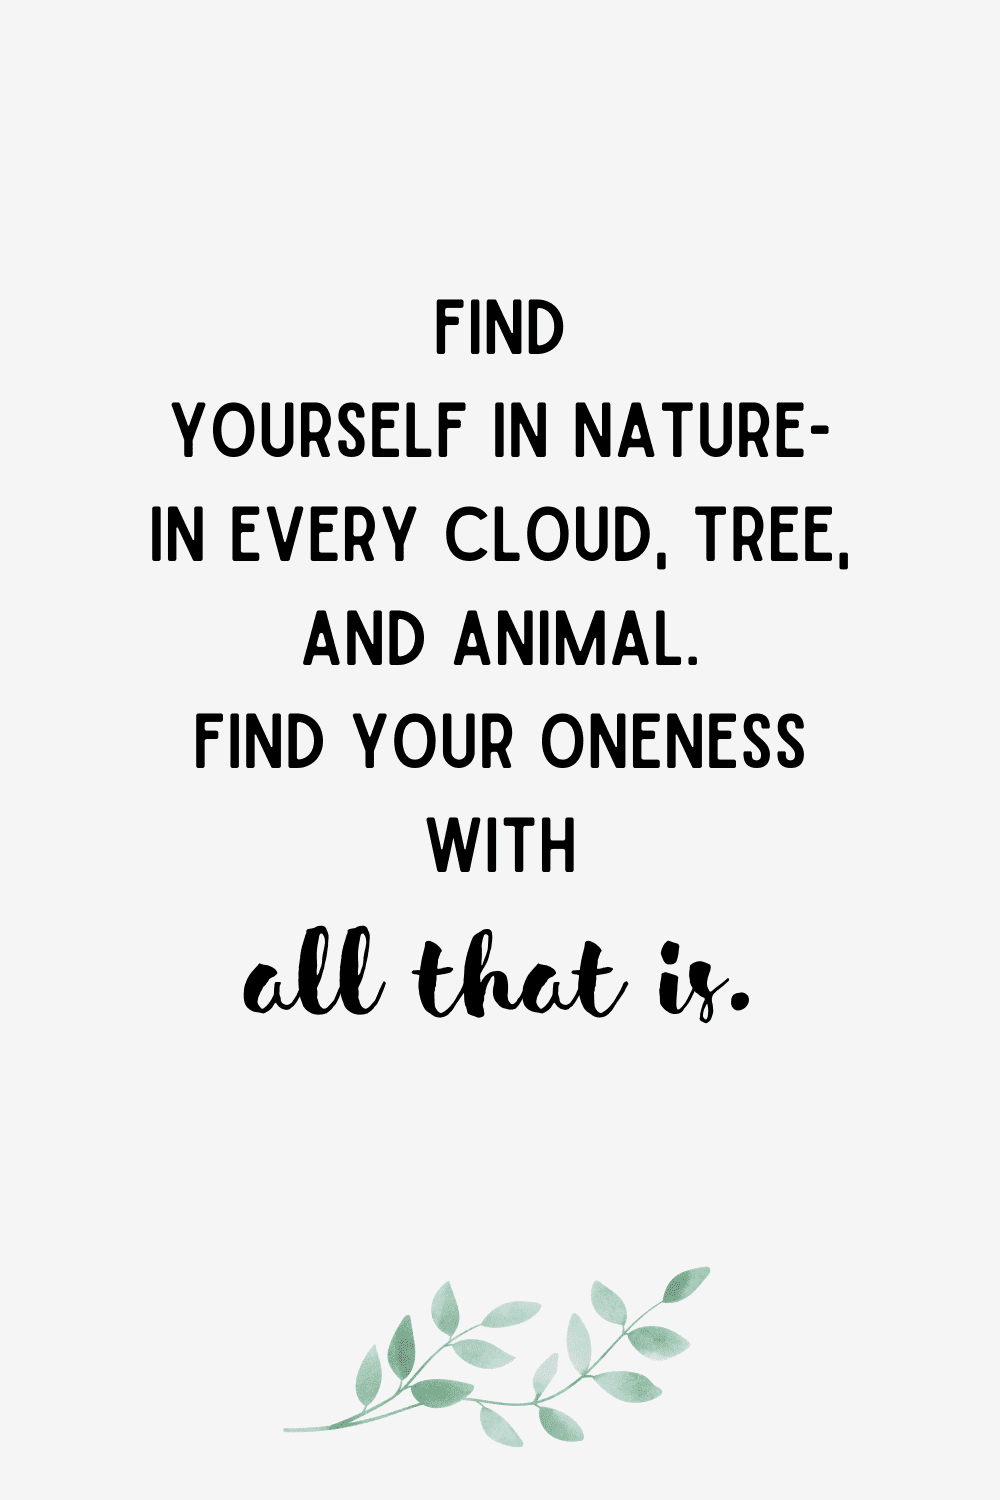 Find yourself in nature quote